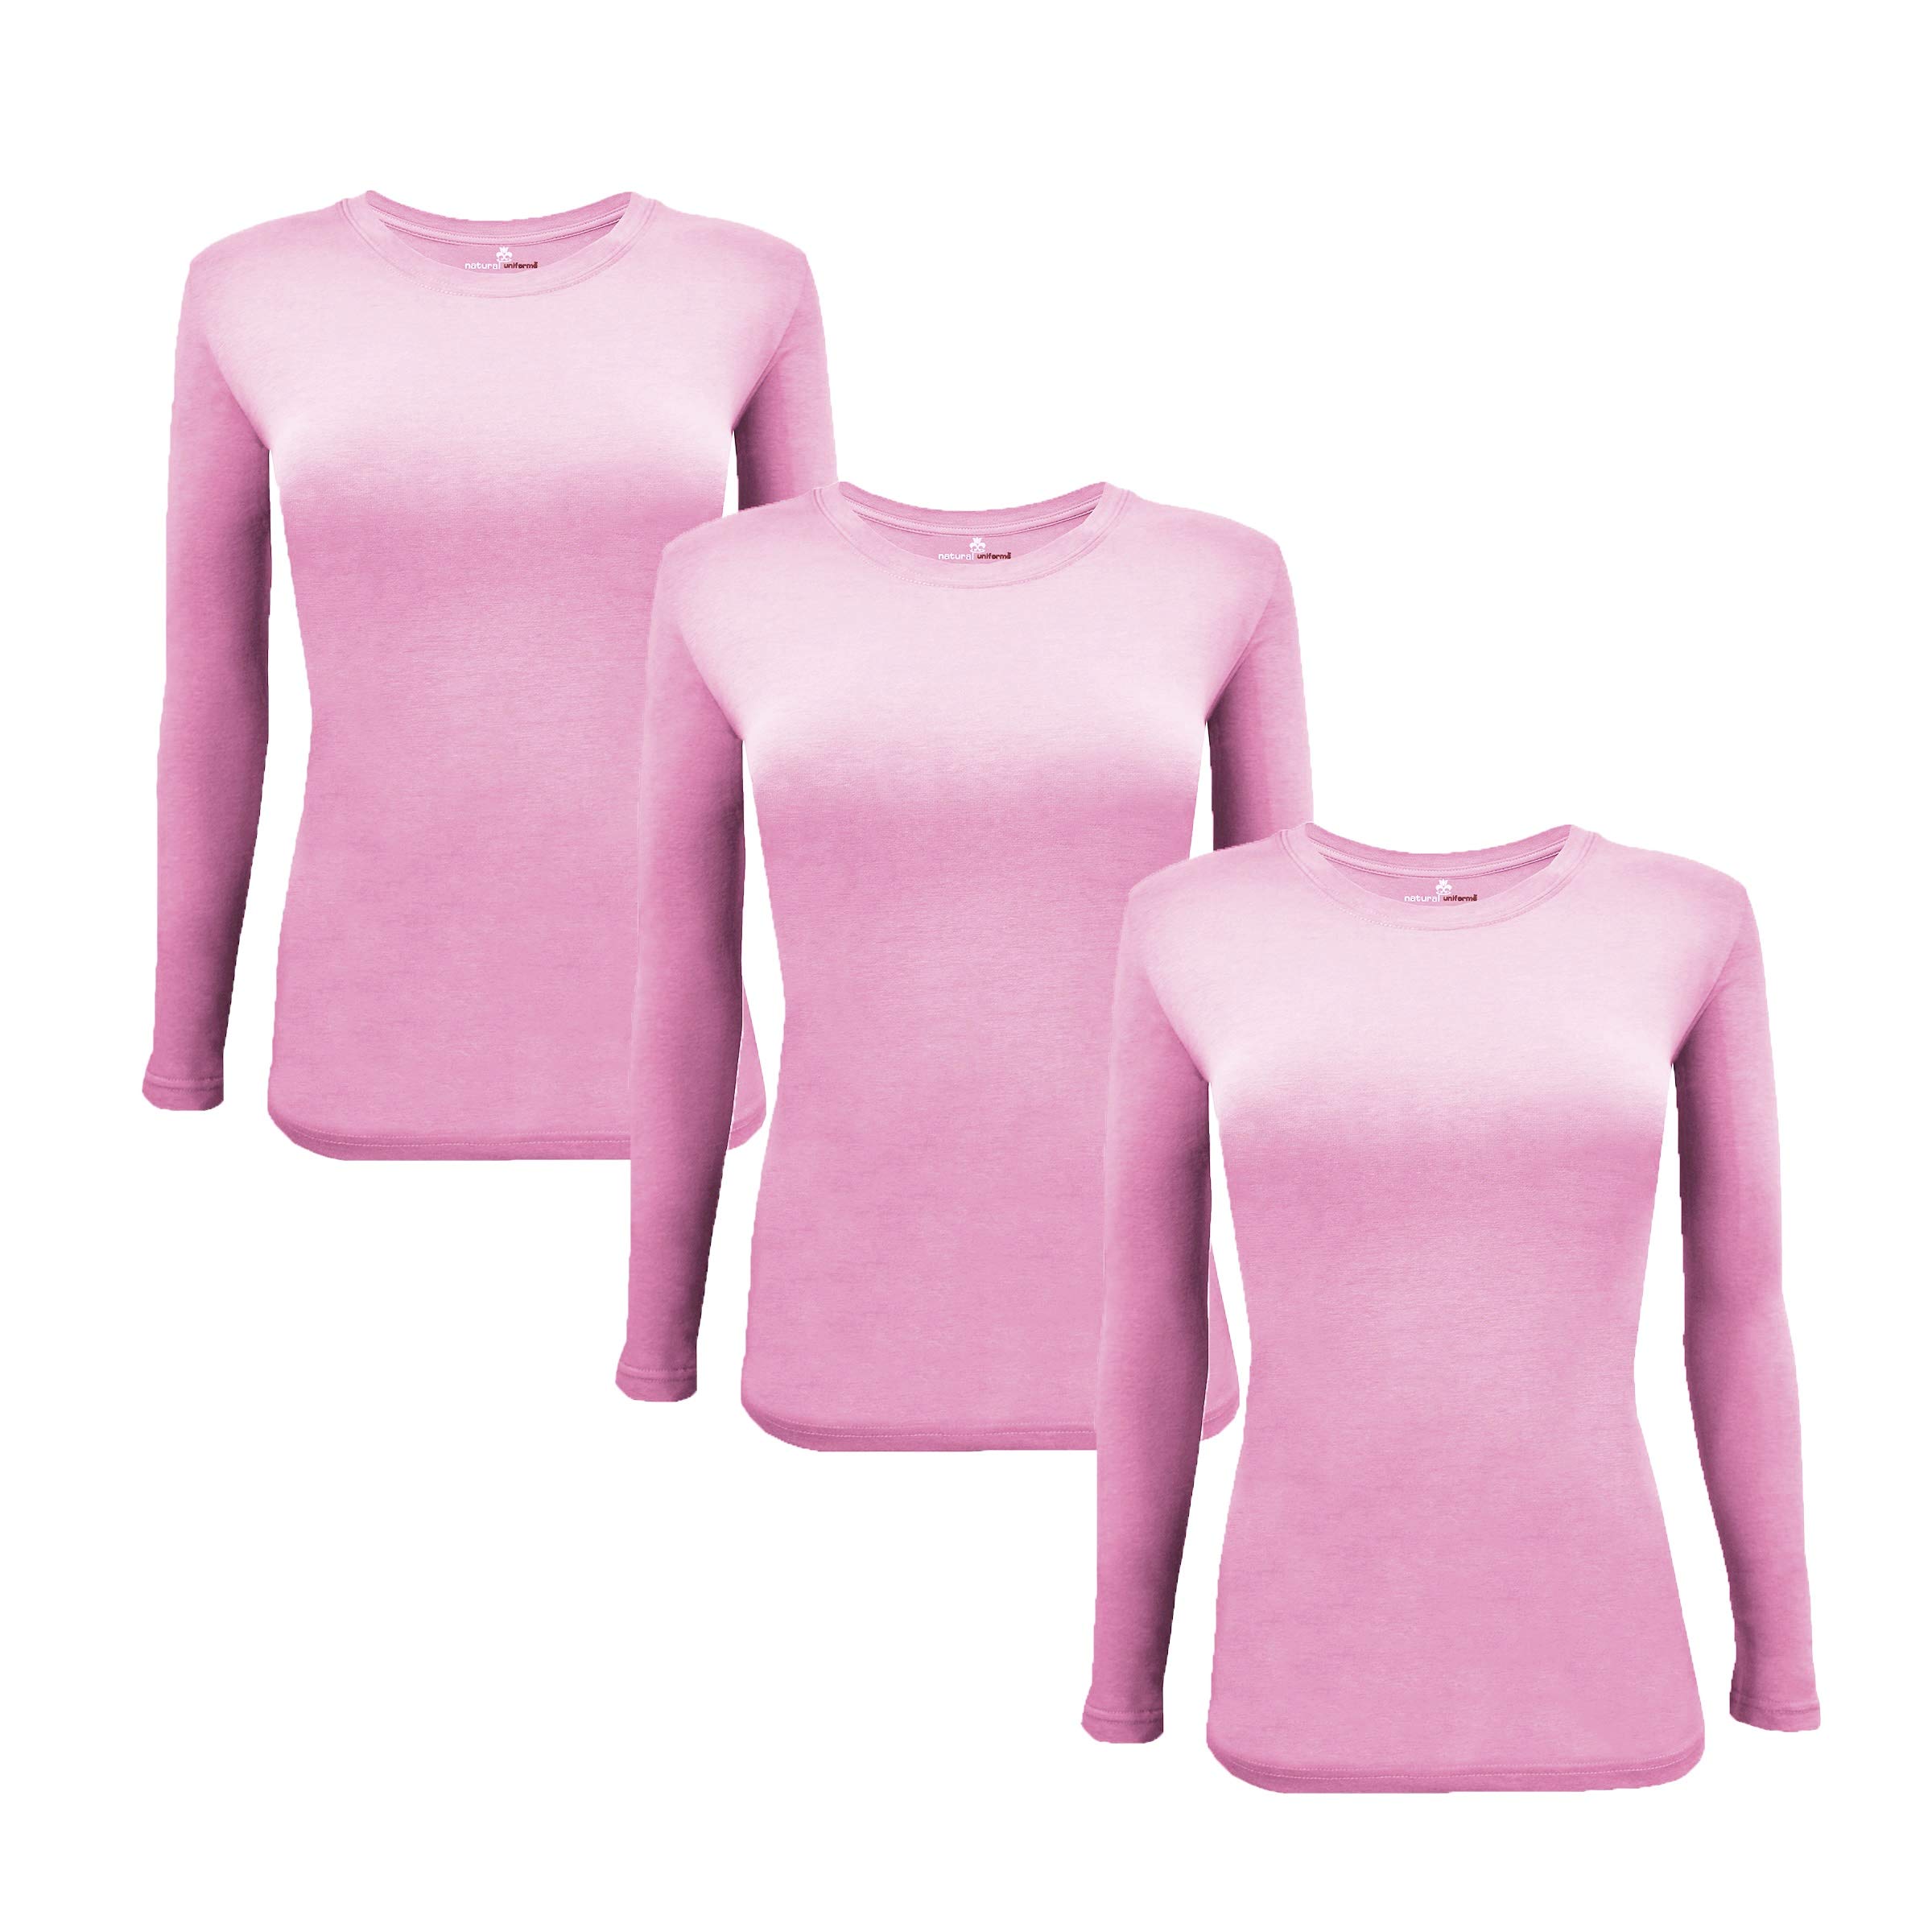 Natural Uniforms Womens Under Scrub Tee crew Neck Long Sleeve T-Shirt-3-Pack (2X-Large, 3 Pack-Pink)